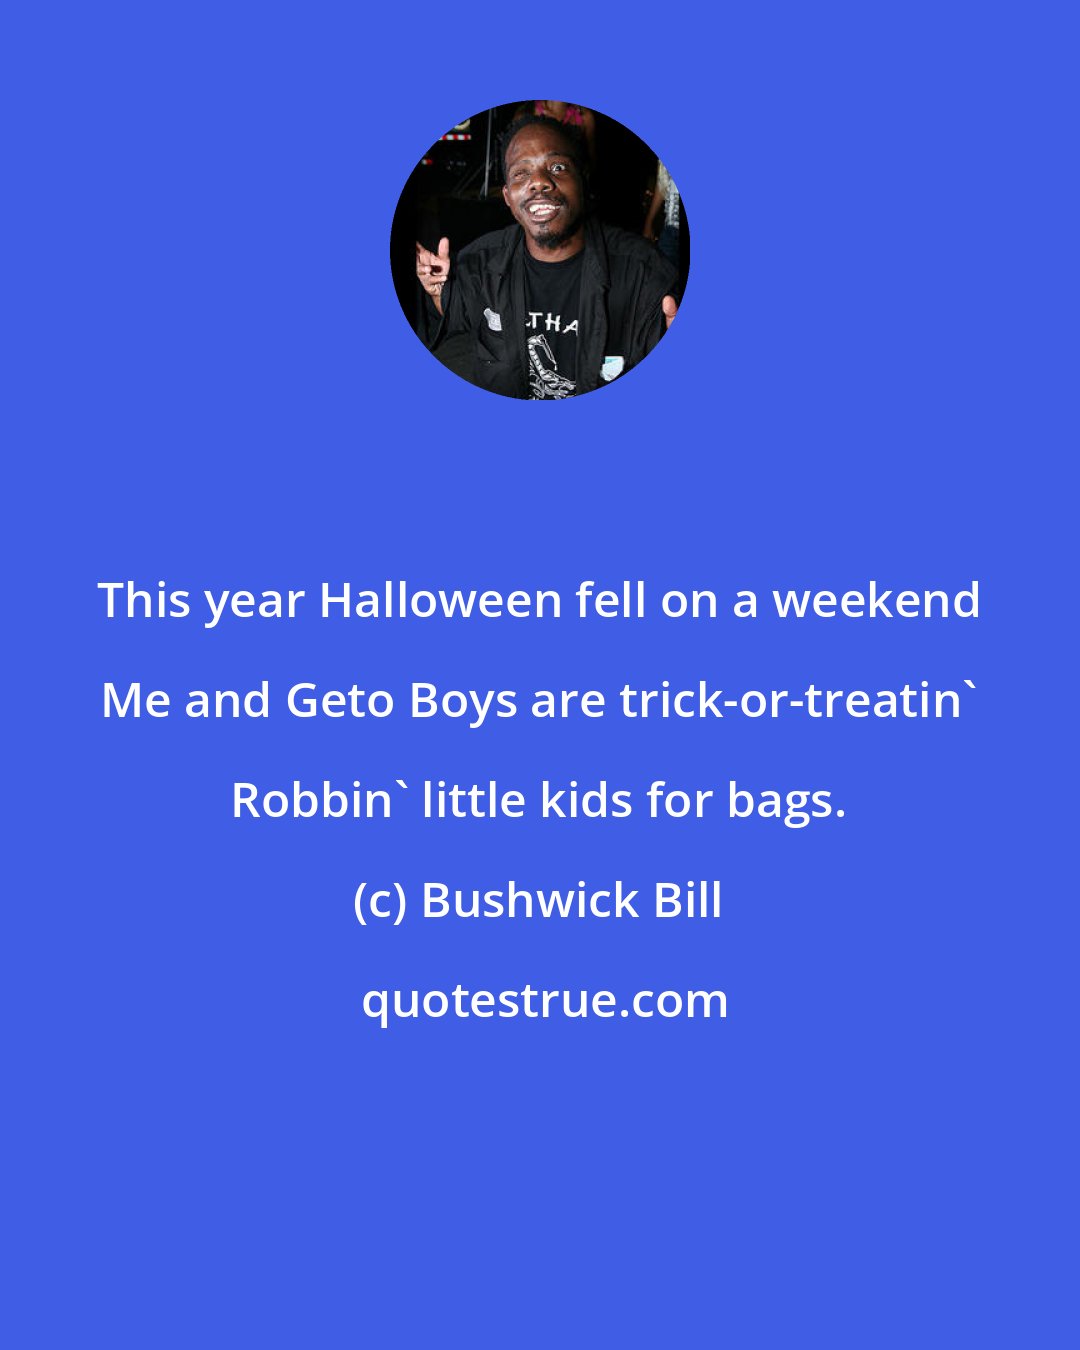 Bushwick Bill: This year Halloween fell on a weekend Me and Geto Boys are trick-or-treatin' Robbin' little kids for bags.